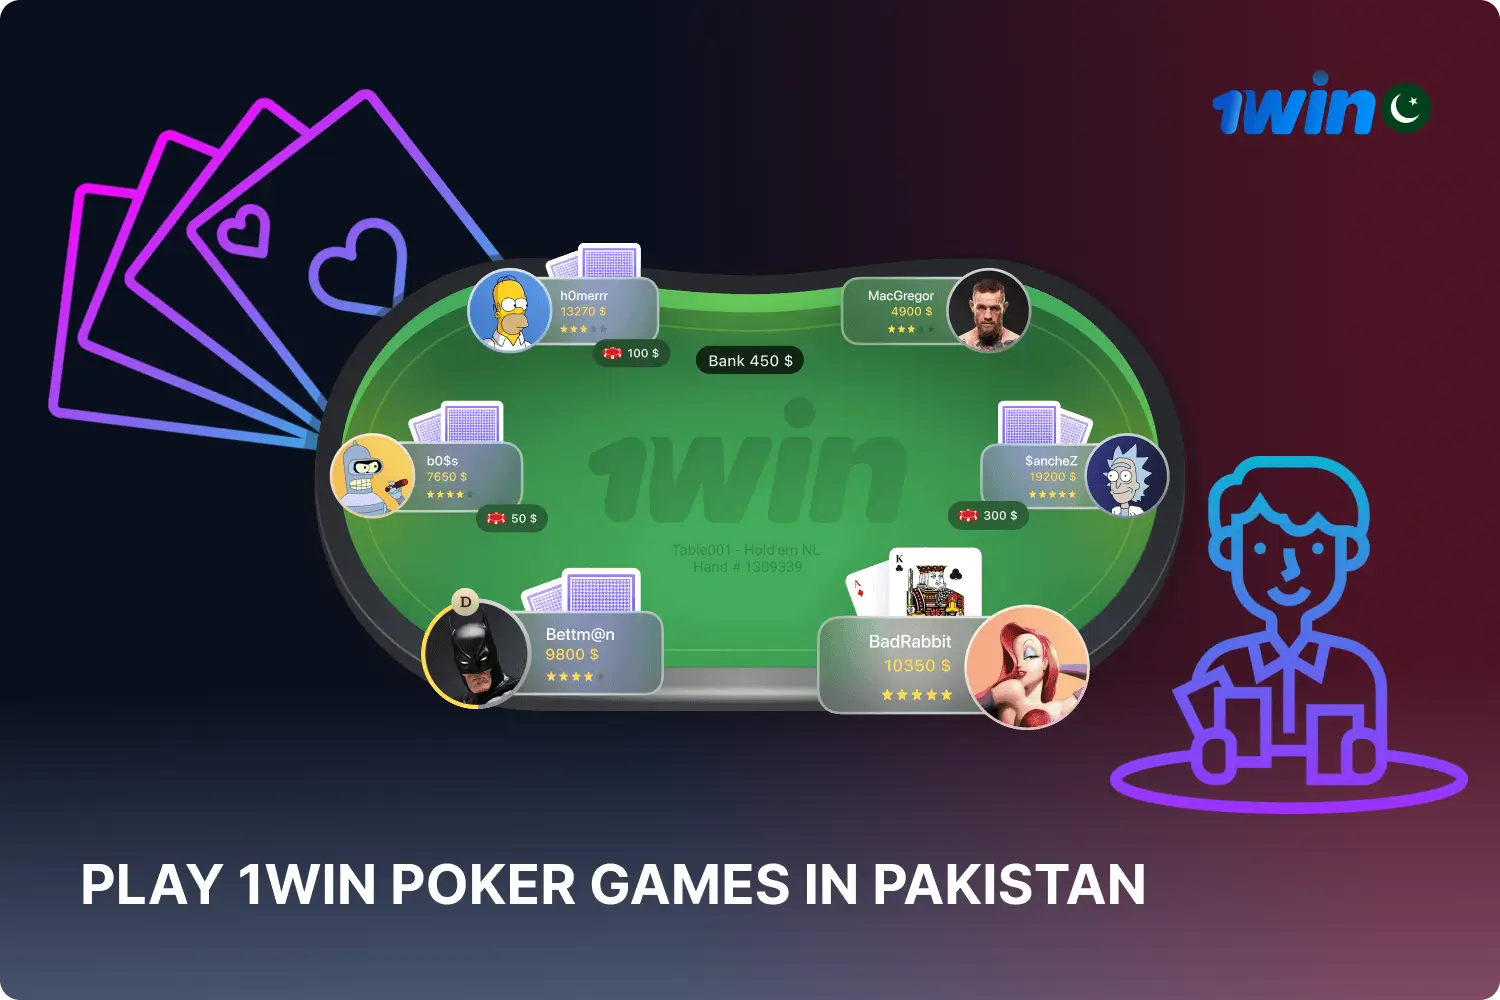 Players in Pakistan have access to a variety of poker games against experienced opponents on the 1win platform